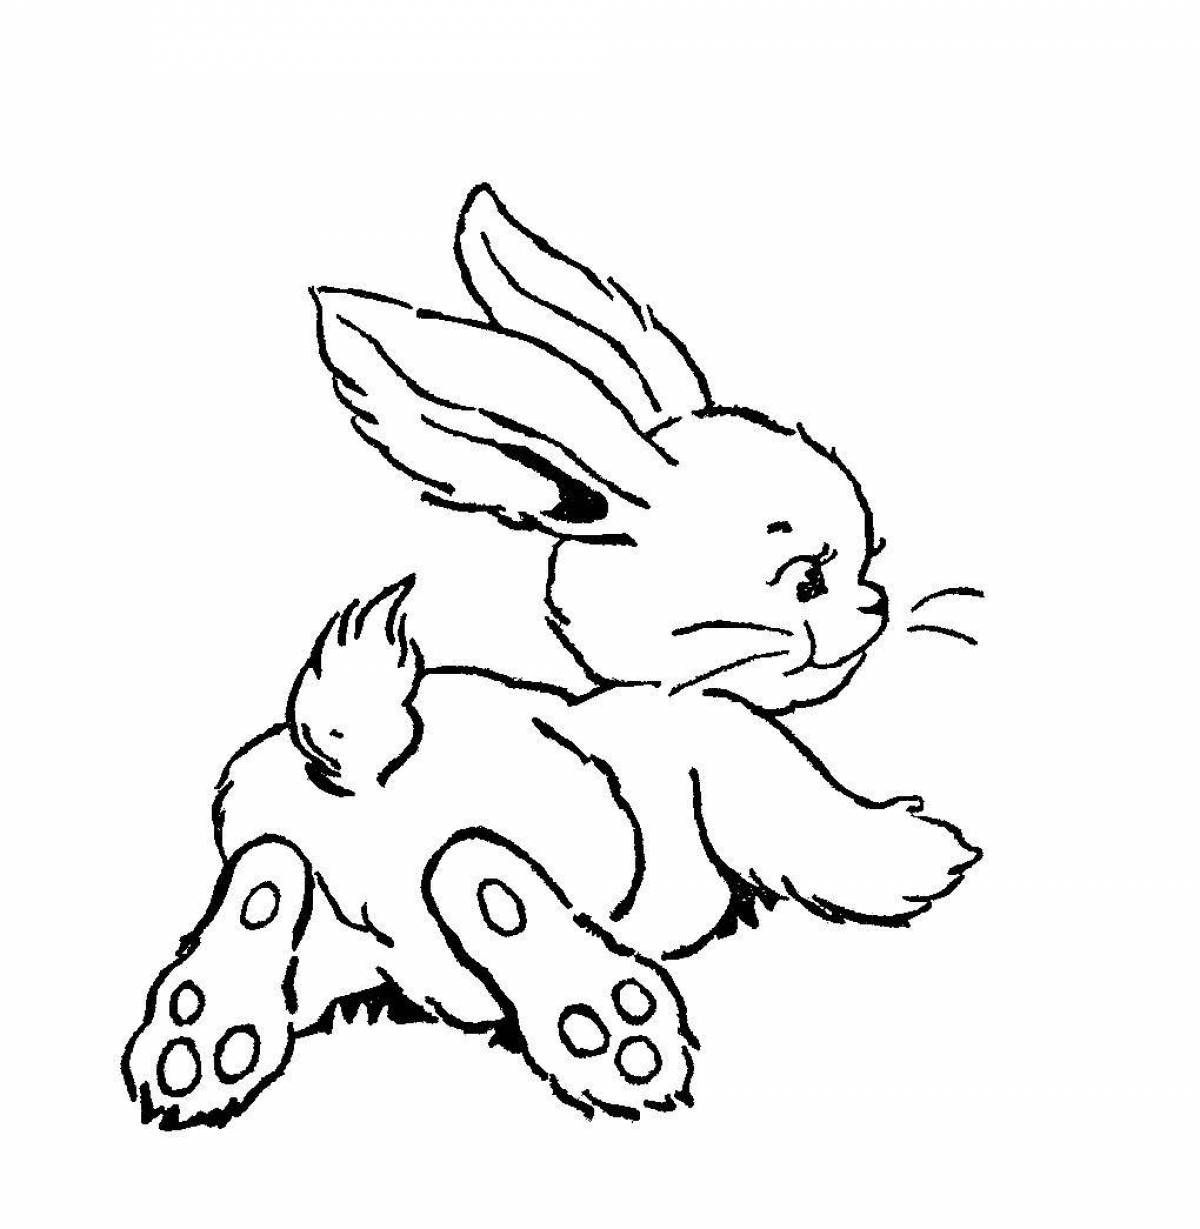 Attractive rabbit and cat coloring page